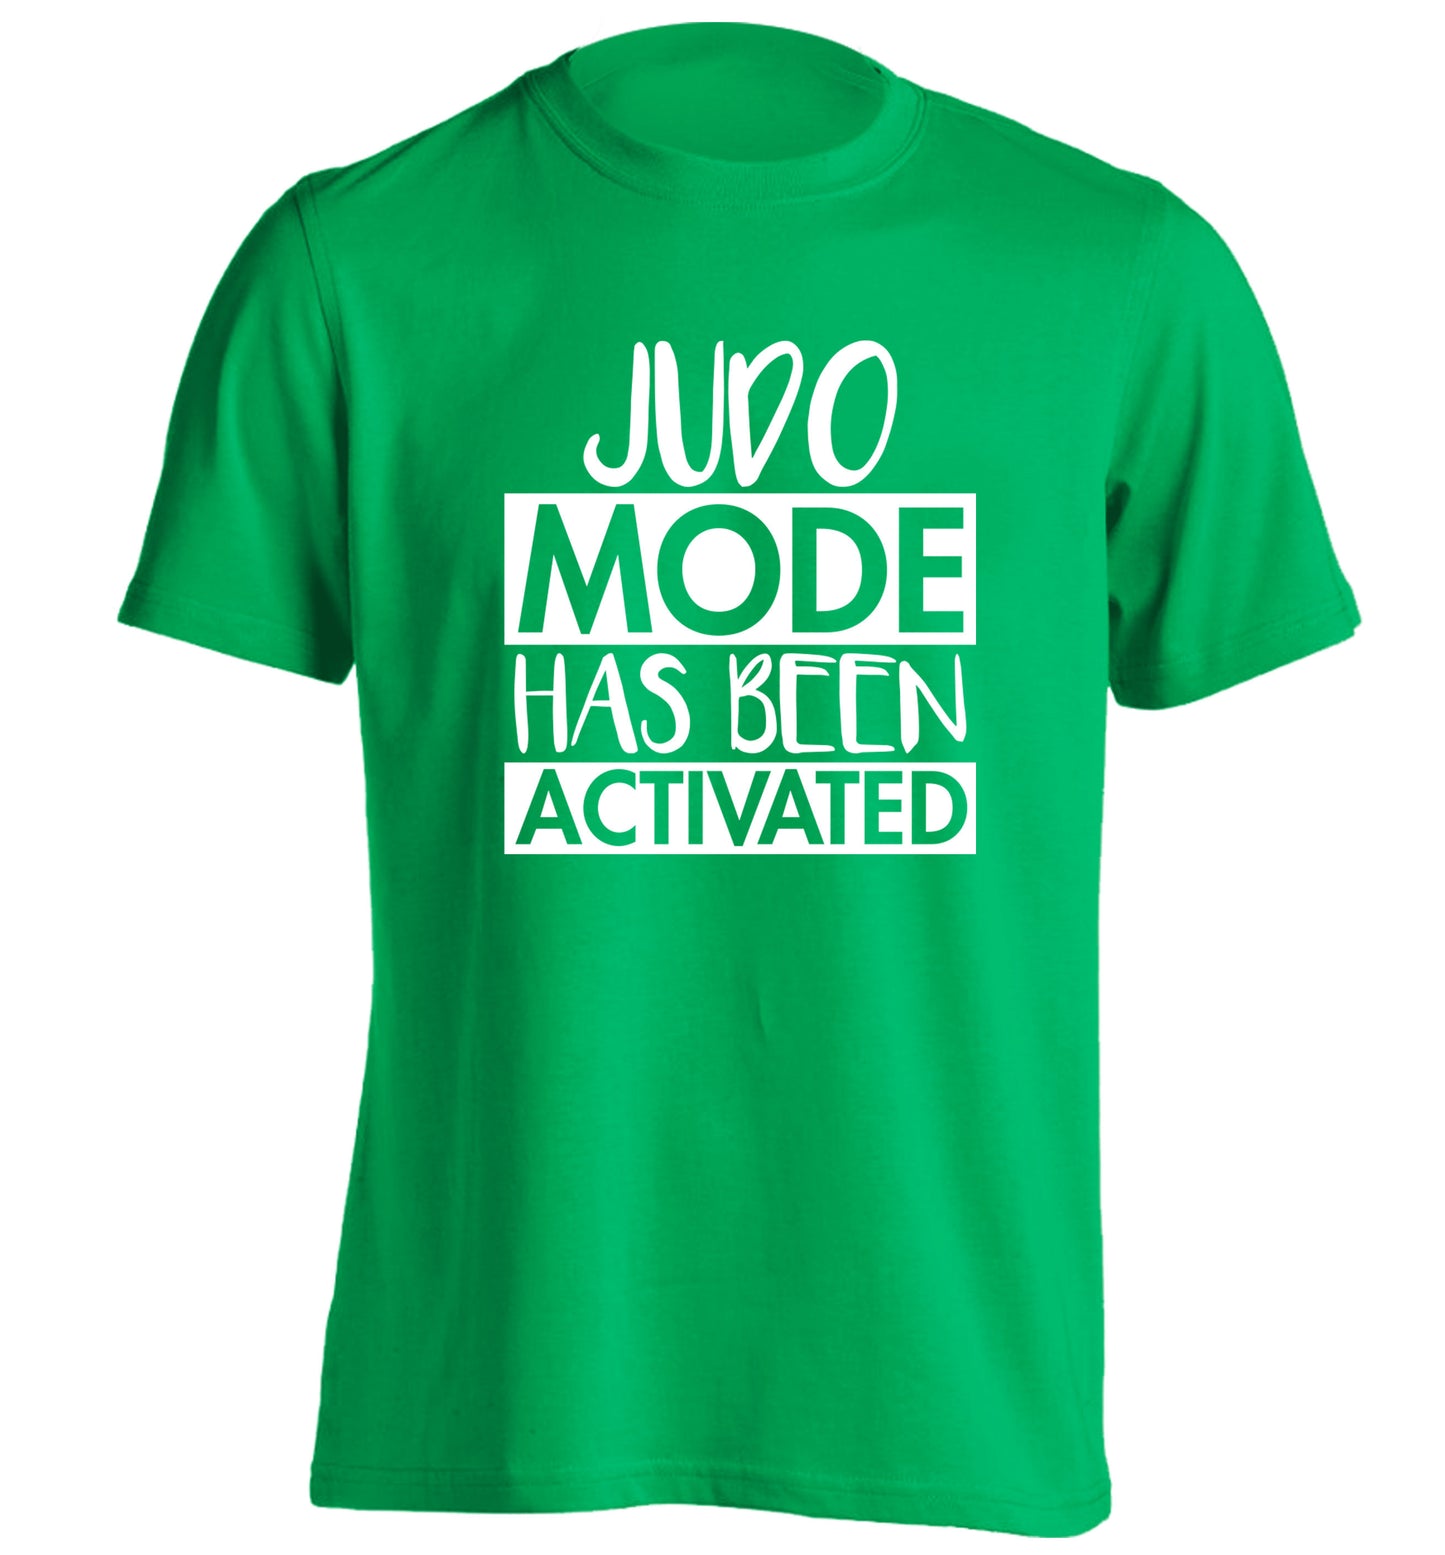 Judo mode activated adults unisex green Tshirt 2XL